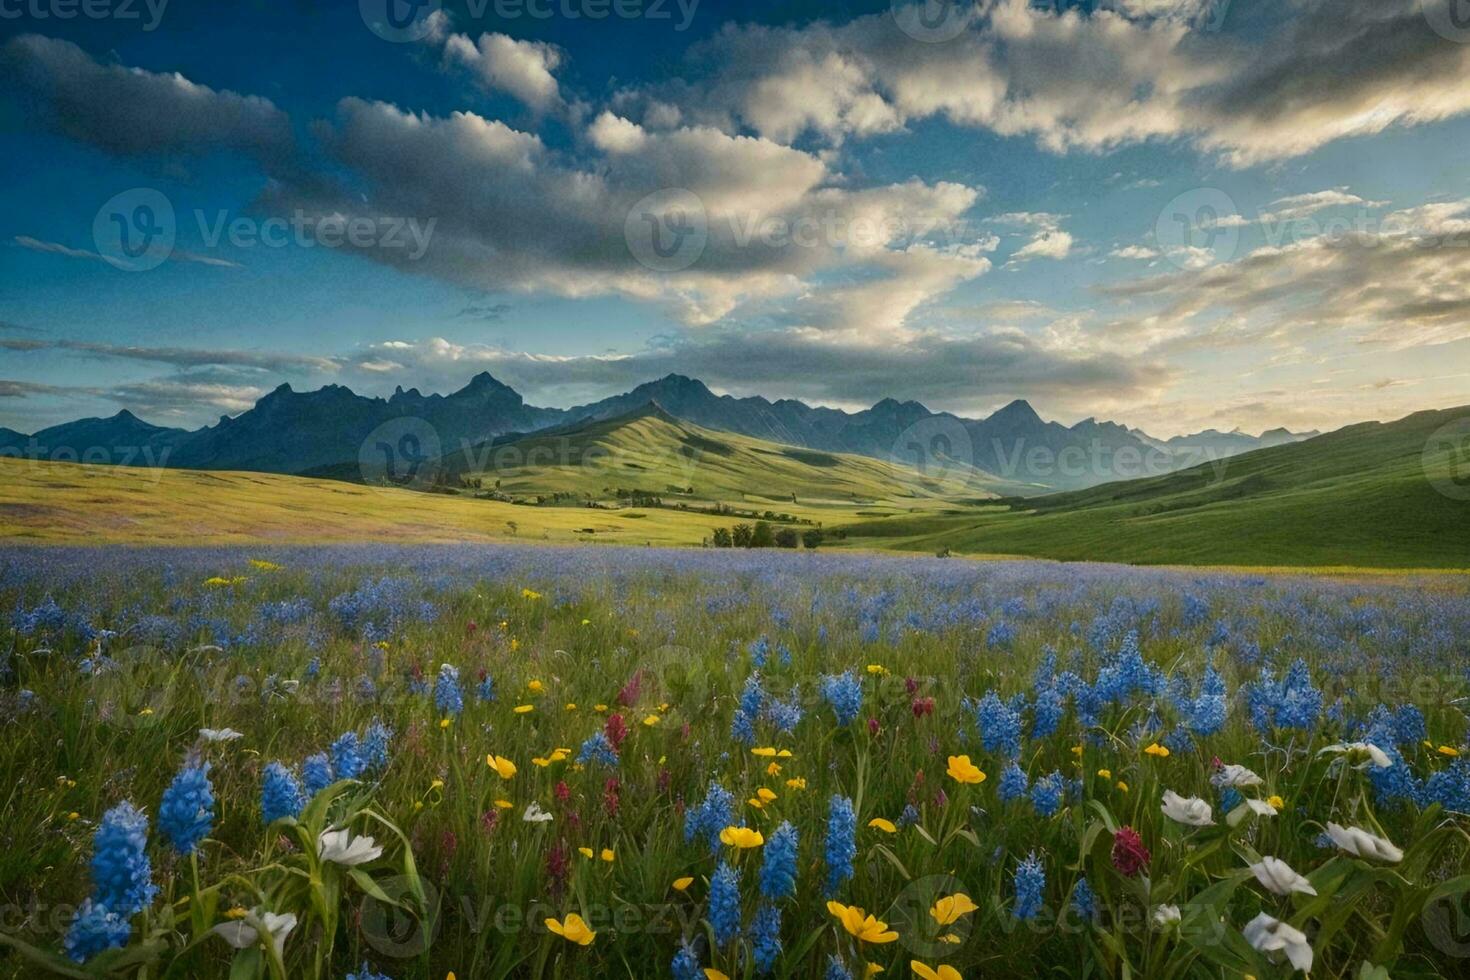 Landscape Photography of a vibrant summer meadow, a tranquil scene of uncultivated beauty in nature. photo